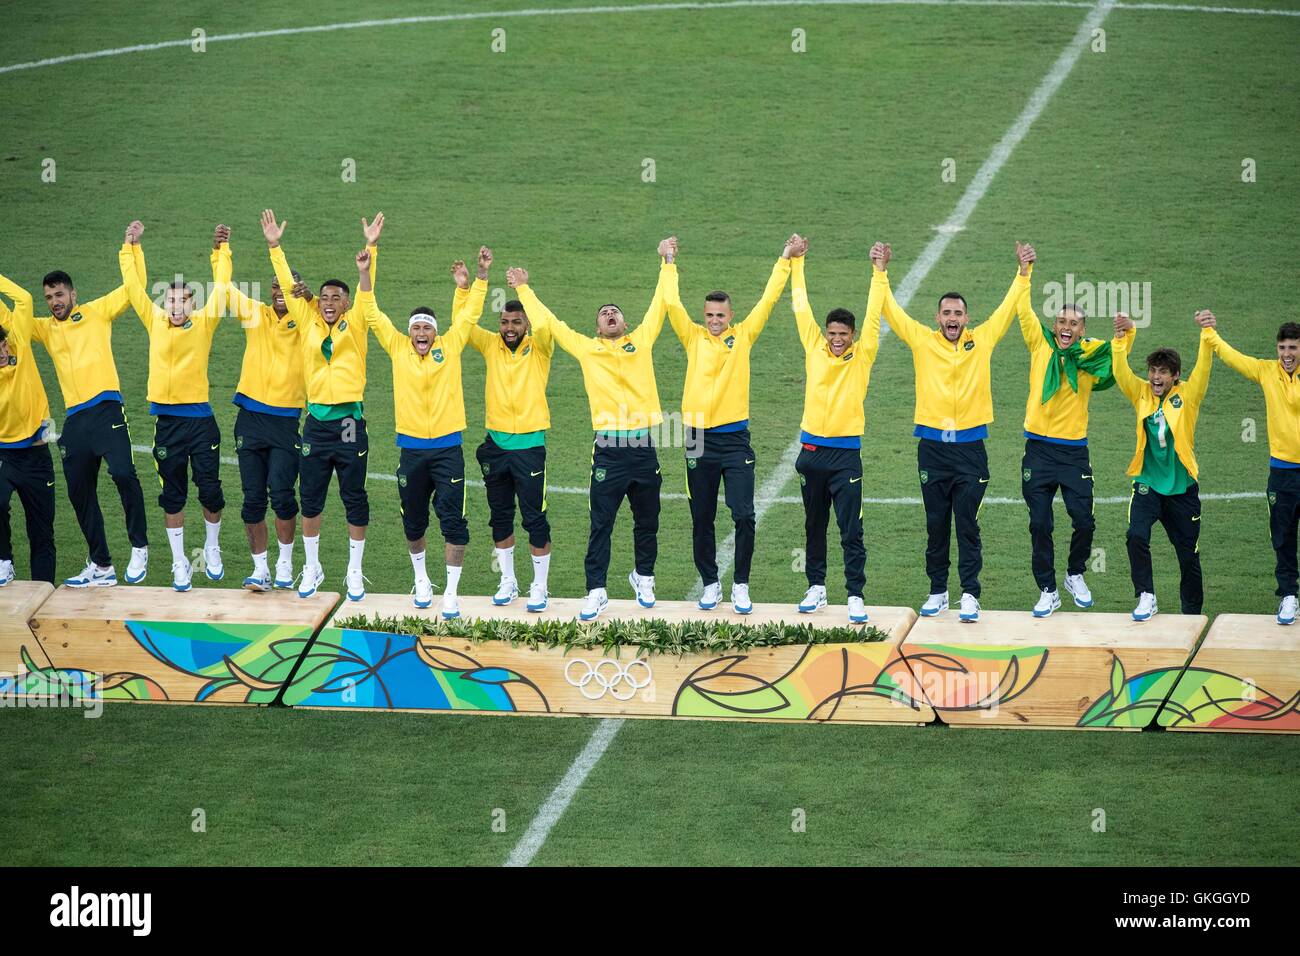 Rio de Janeiro, Brazil. 20th Aug, 2016. Brazil team group (BRA) Football/Soccer : Brazil players celebrate on the podium during the medal ceremony after the Rio 2016 Olympic Games Men's Football Final match between Brazil 1(5-4)1 Germany at Maracana in Rio de Janeiro, Brazil . Credit:  Enrico Calderoni/AFLO SPORT/Alamy Live News Stock Photo